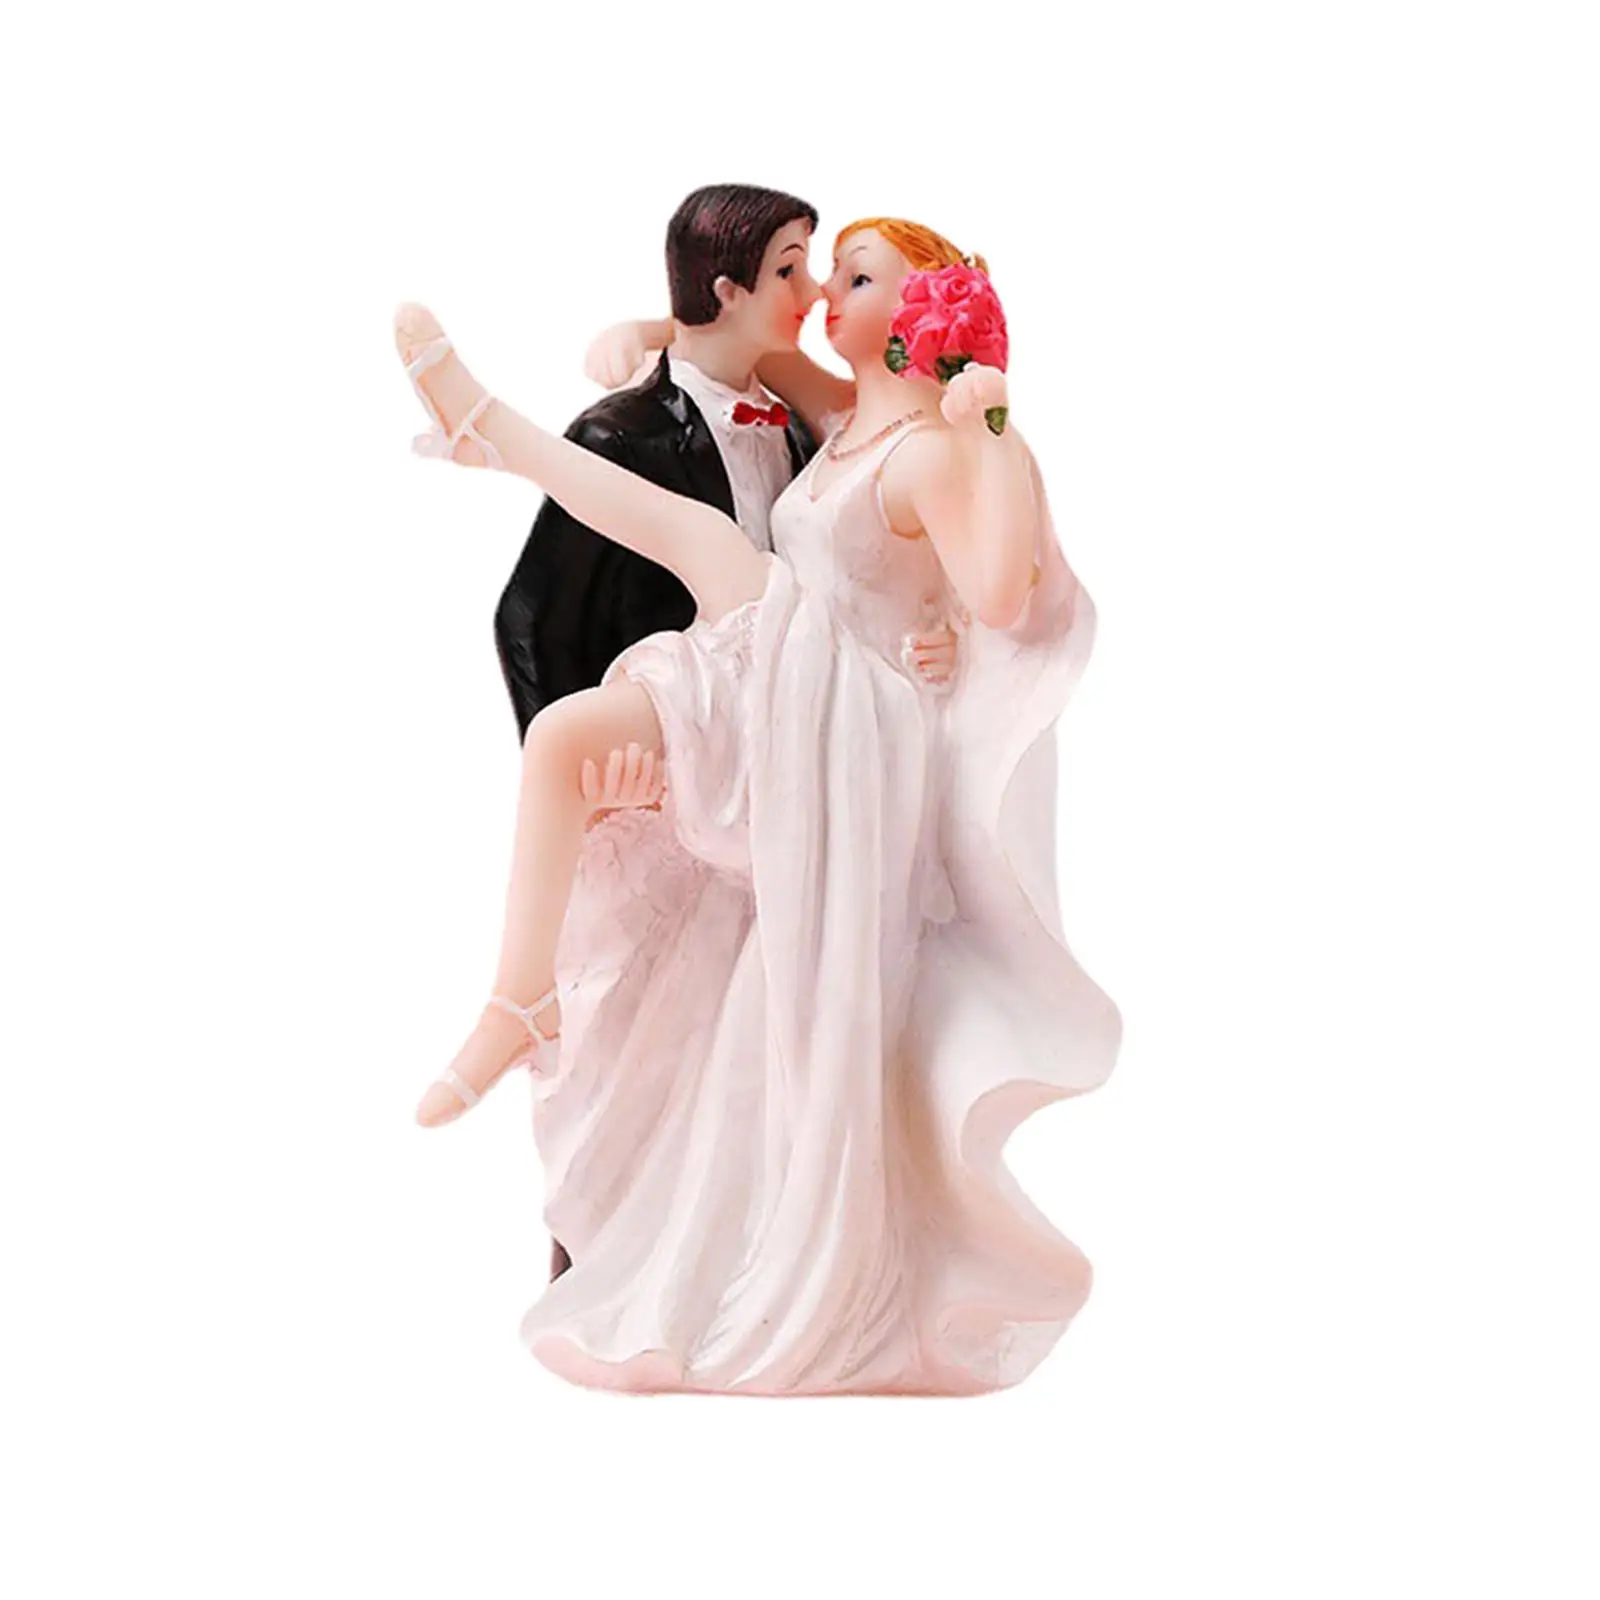 Wedding Cake Topper Desk Decoration Resin Figurines Couple Figures for Engagement Bride Shower Valentines Day Party Gift